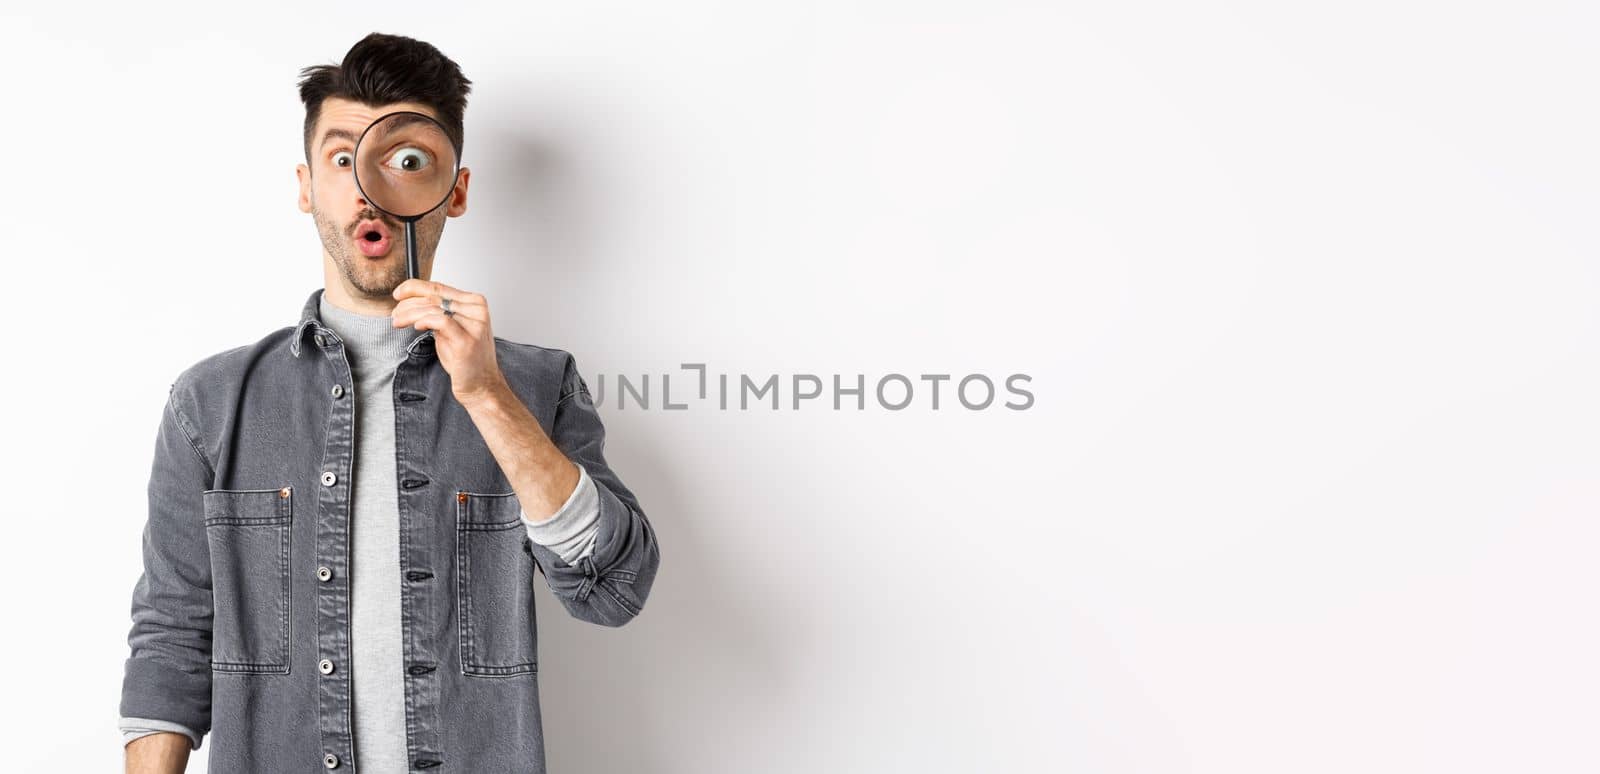 Image of excited guy look through magnifying glass, gasping amazed, big eye staring at interesting thing, found cool promo, standing on white background.